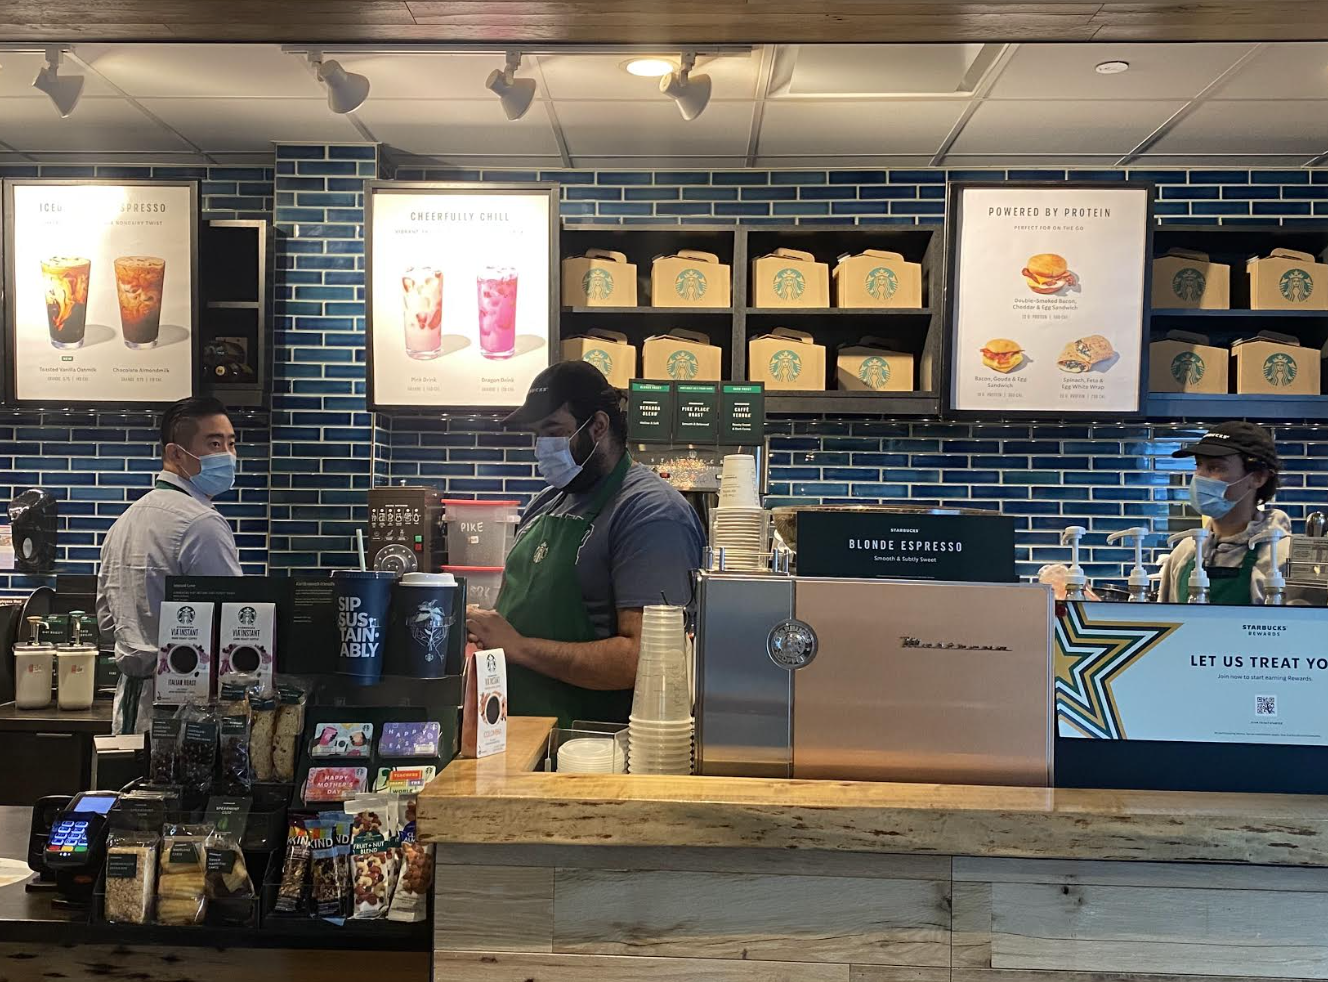 Brian Gedemer, the executive chef, working with a student worker at Starbucks on April 14, 2022. (Photo by Khushi Gandhi.)